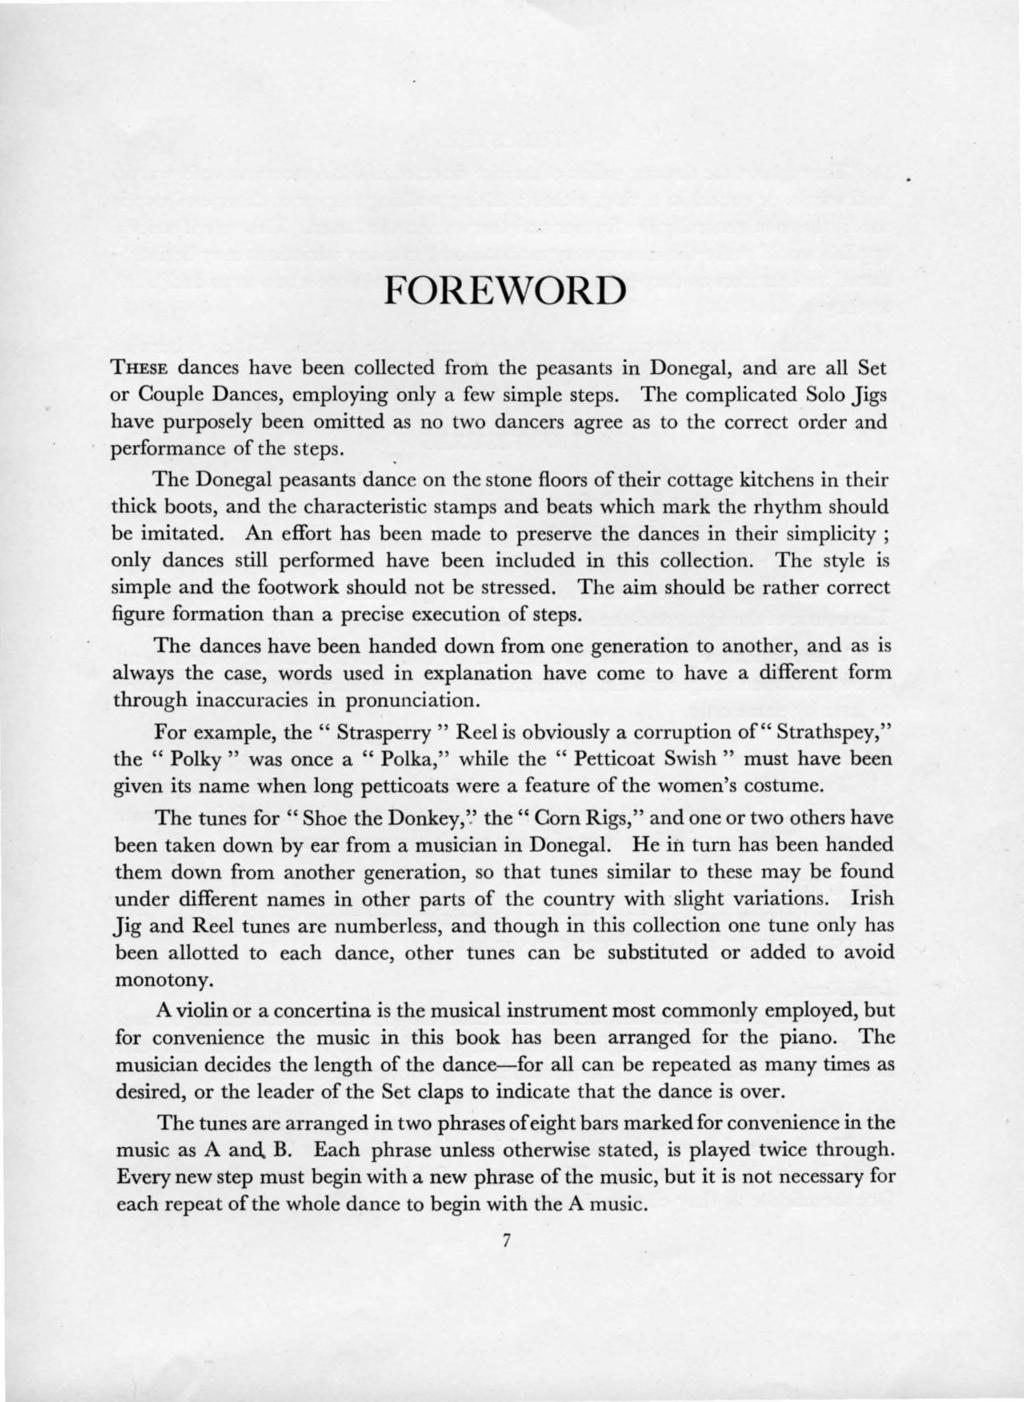 FOREWORD THESE dances have been collected from the peasants in Donegal, and are all Set or Couple Dances, employing only a few simple steps.